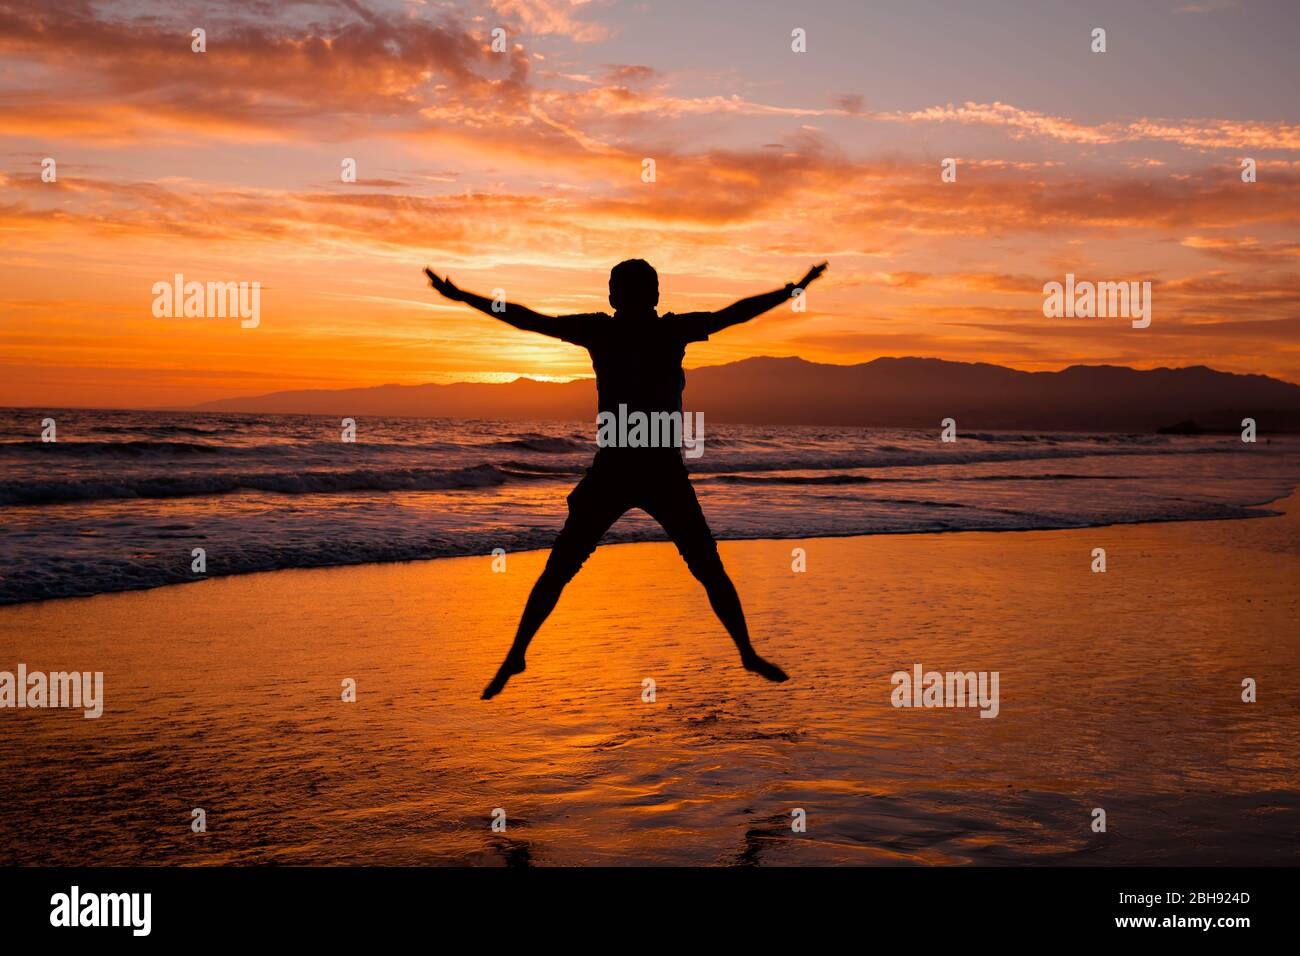 Silhouette of human jumping high on the beach ocean. Evening sunset Stock Photo